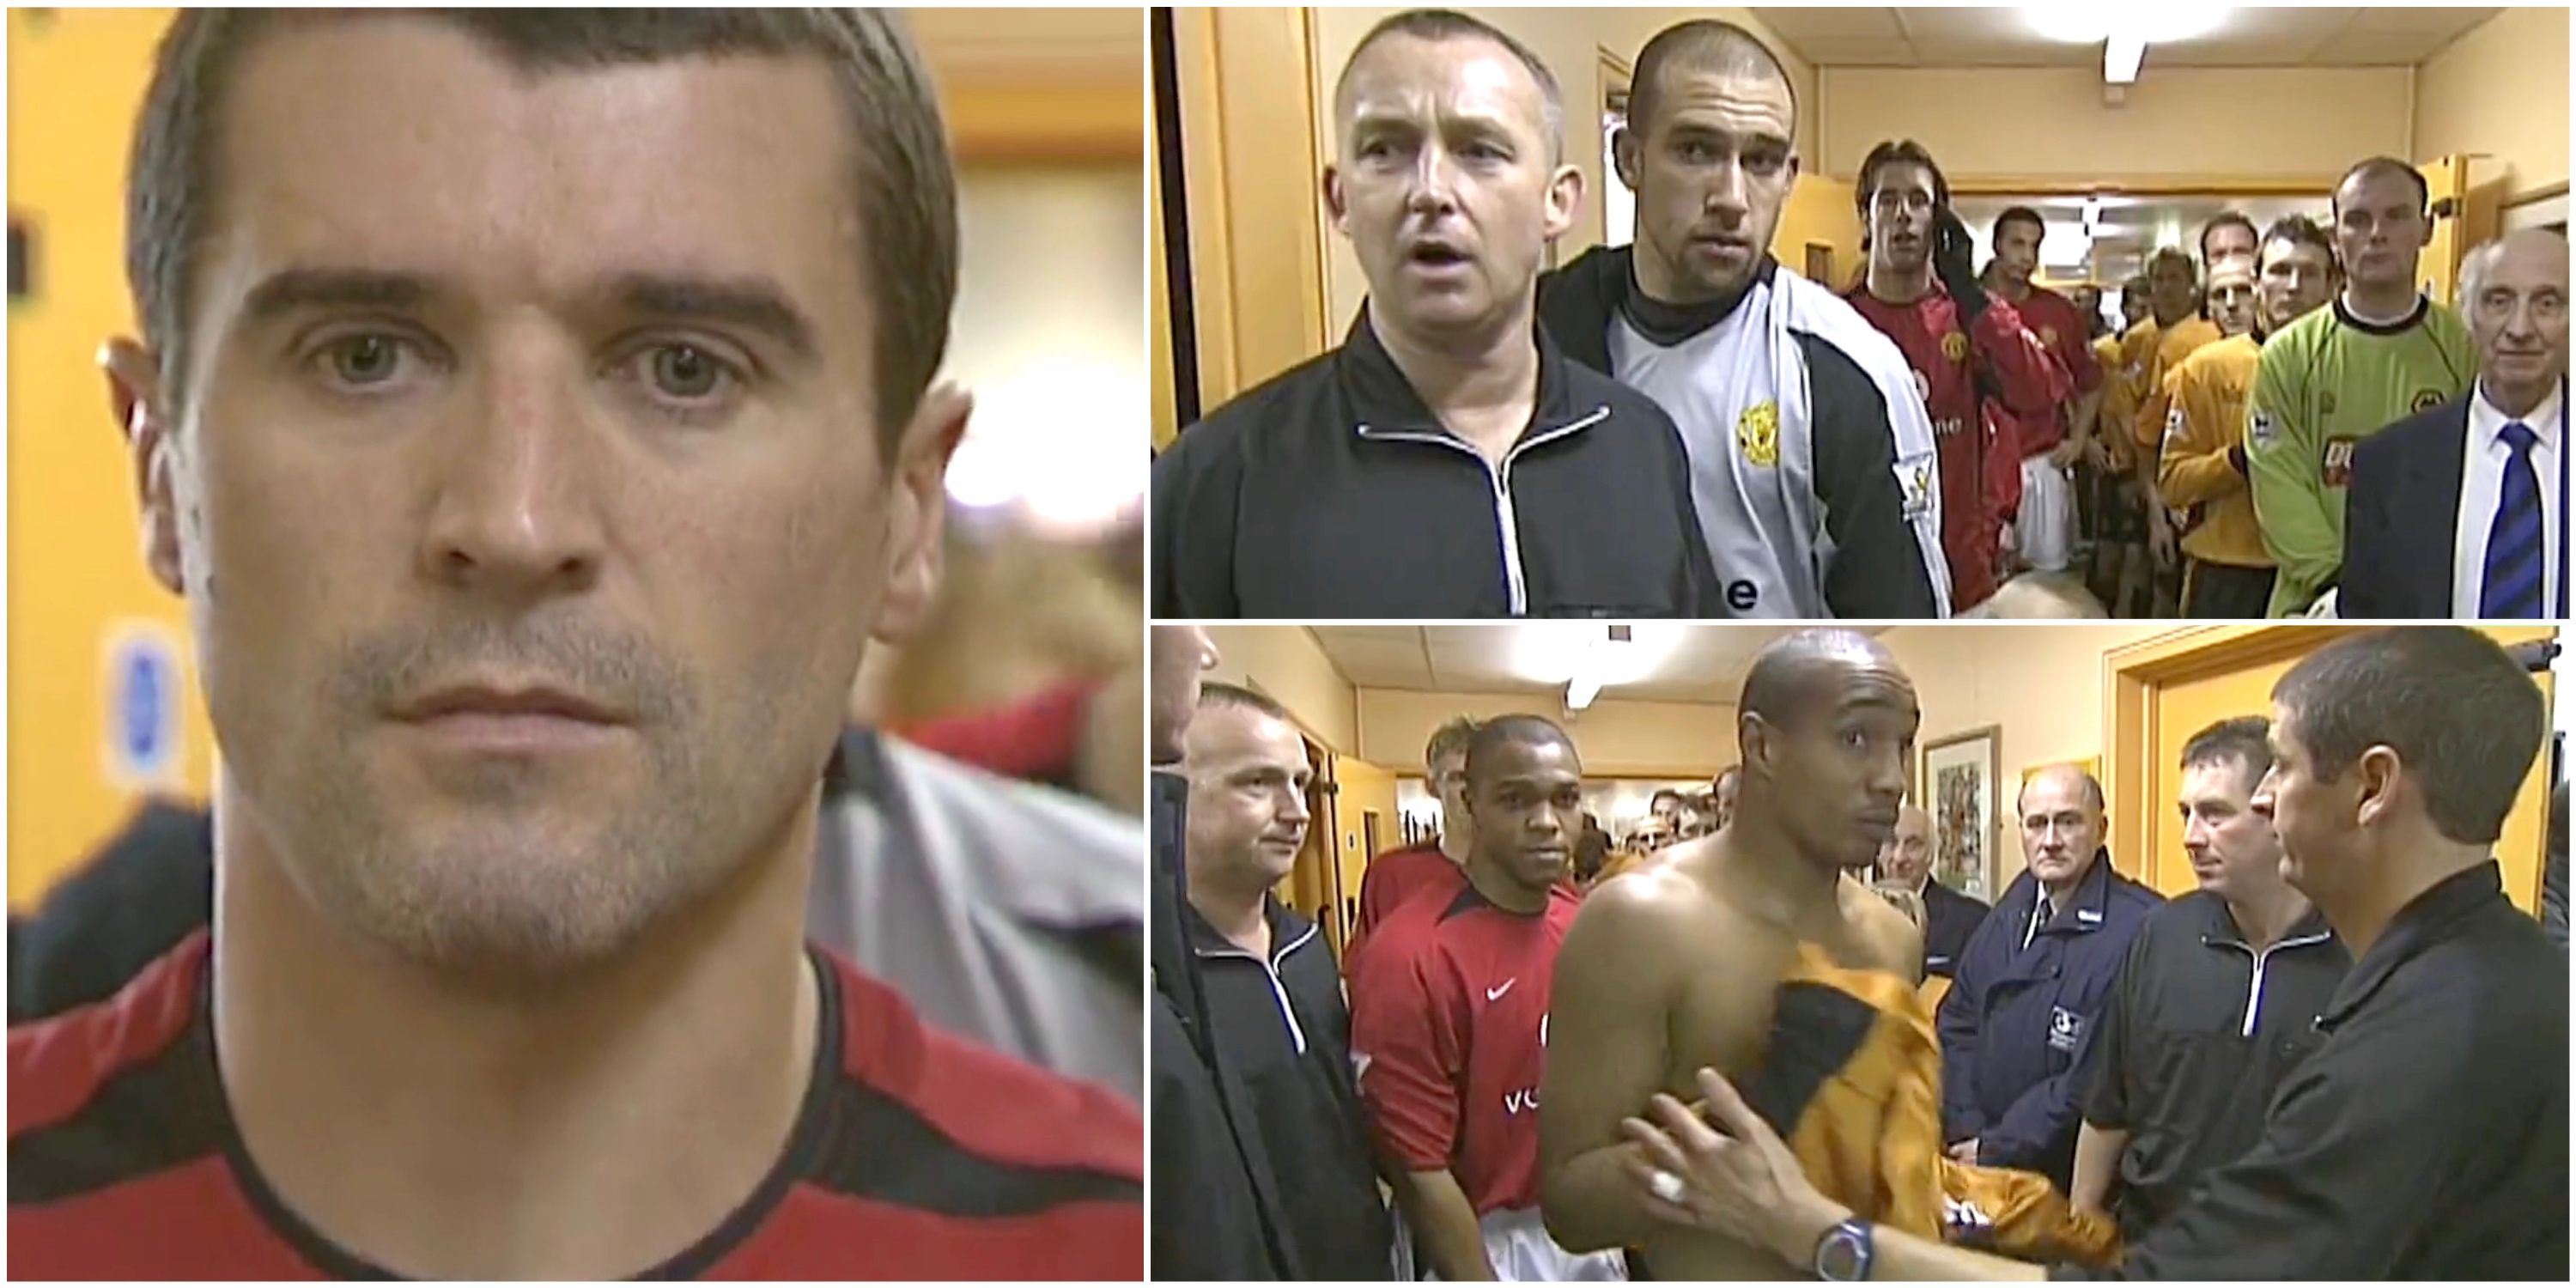 Man Utd legend Roy Keane leading teammates out vs Wolves in 2004 without ref’s permission